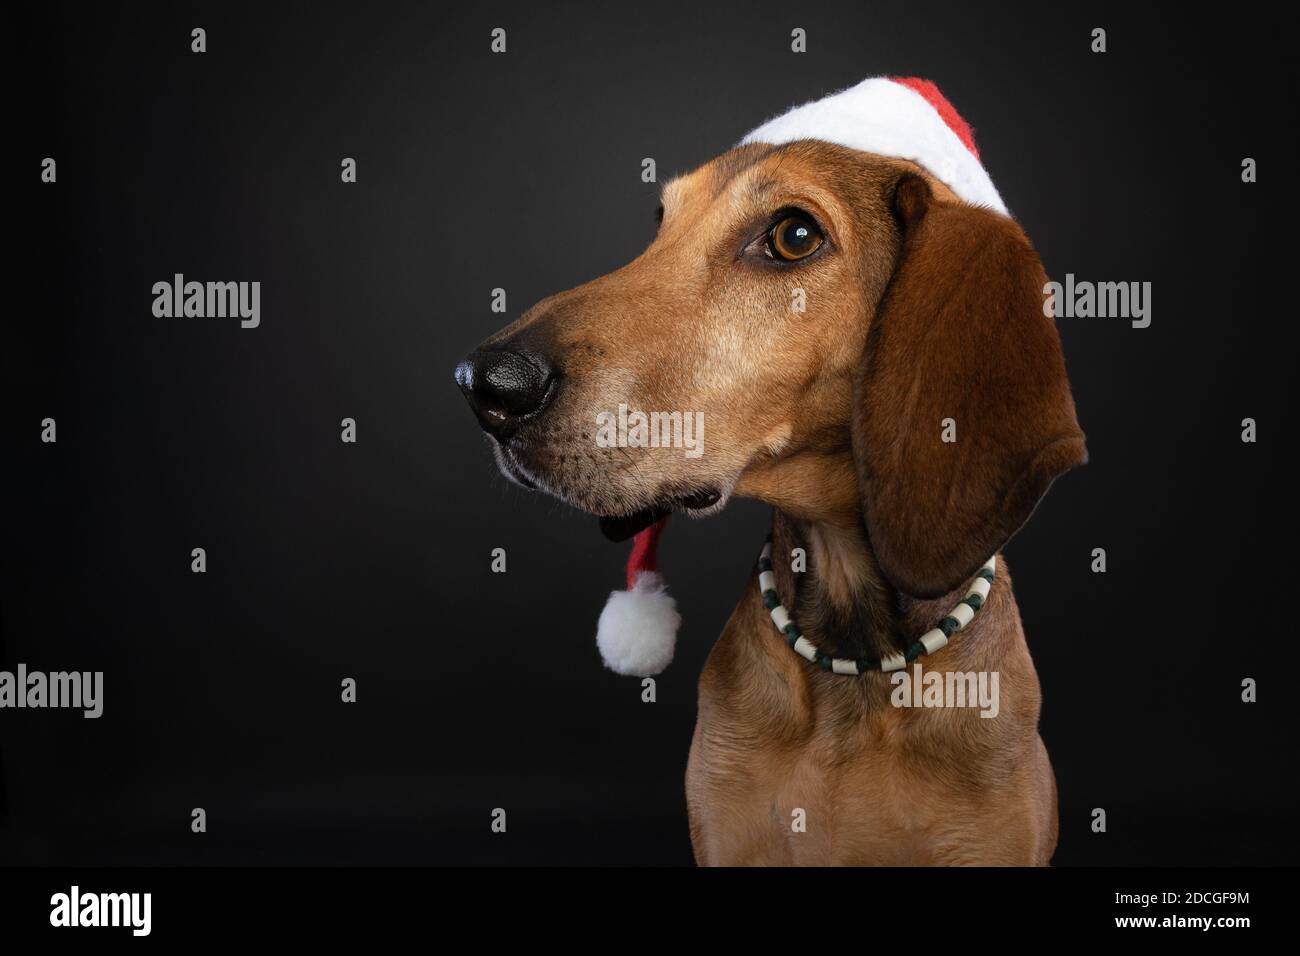 Christmas studio portrait of a brown Segugio Italiano dog looking sideways and wearing a red santa hat on a black background. Stock Photo